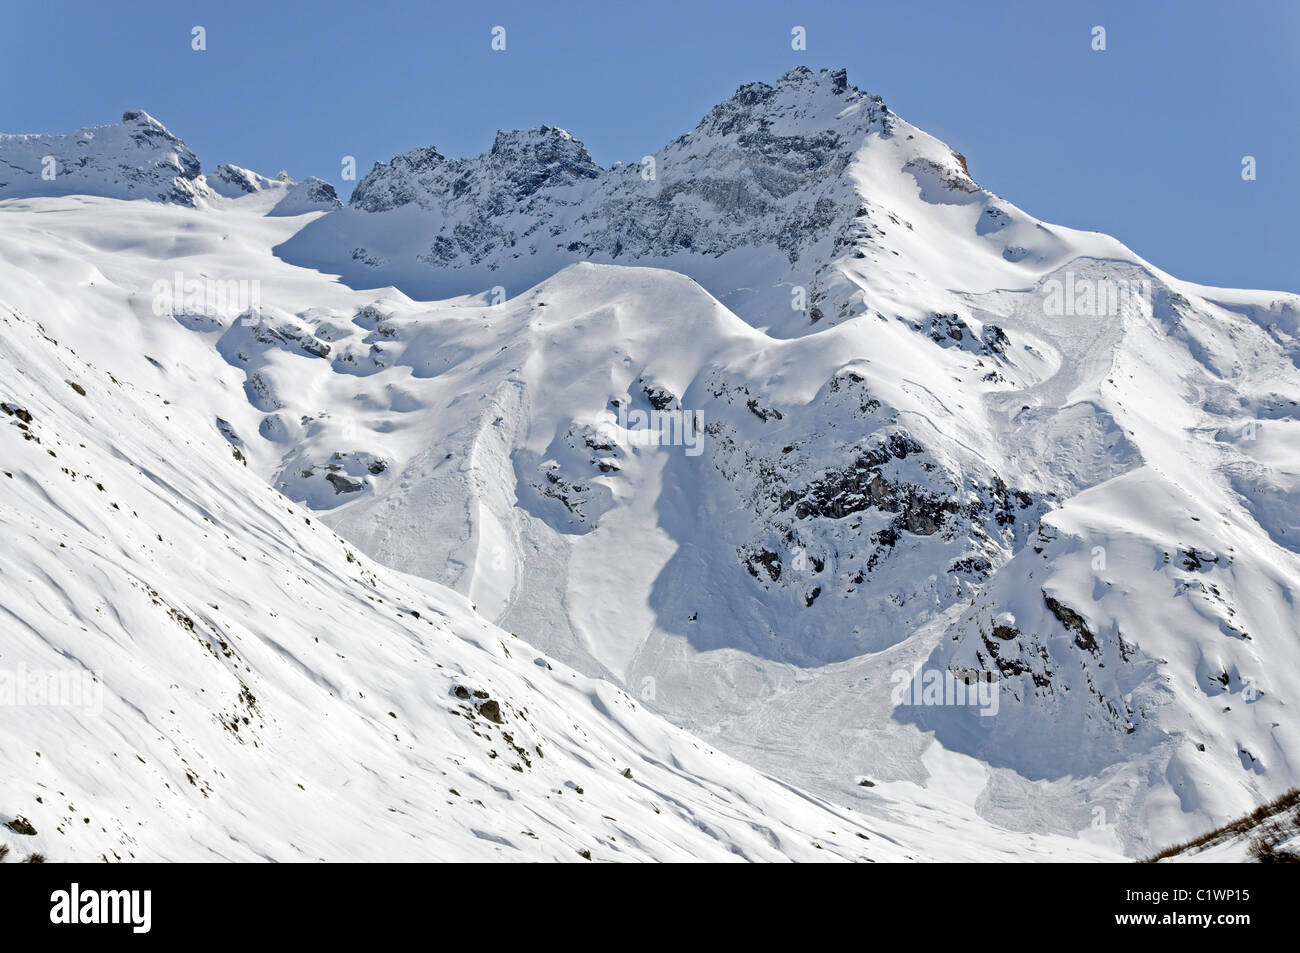 Ski touring in the Haute Maurienne region of France Stock Photo